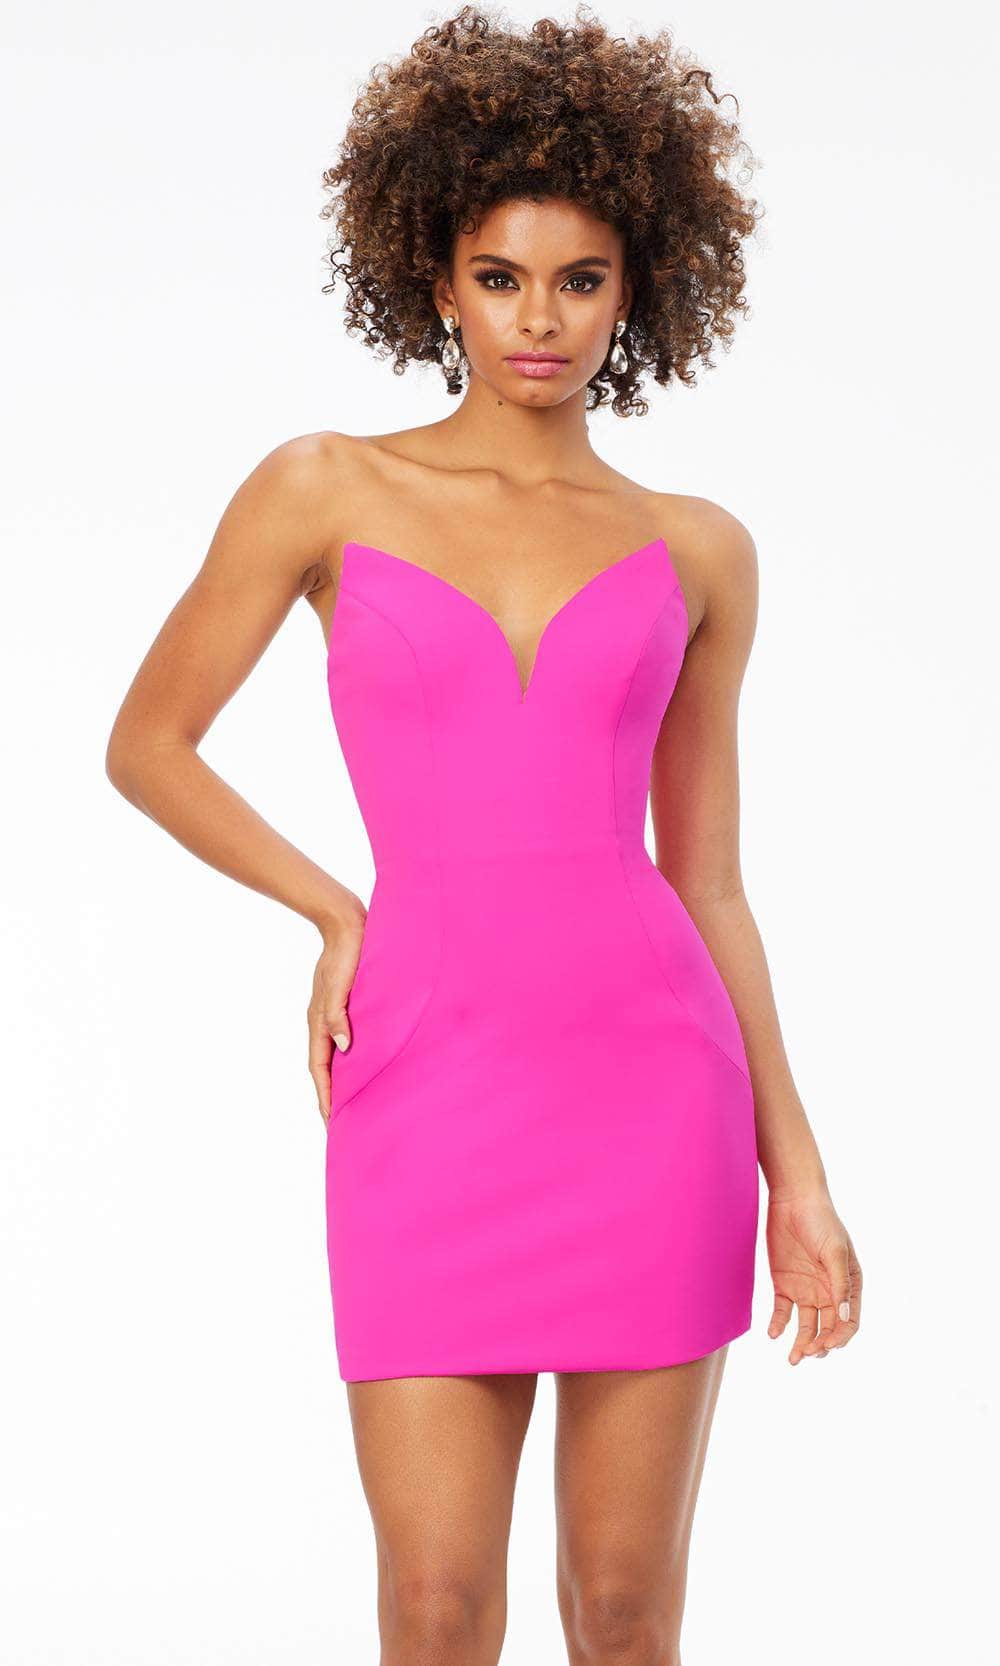 Ashley Lauren 4539 - Edgy Sweetheart Cocktail Dress Special Occasion Dress 00 / Fuchsia